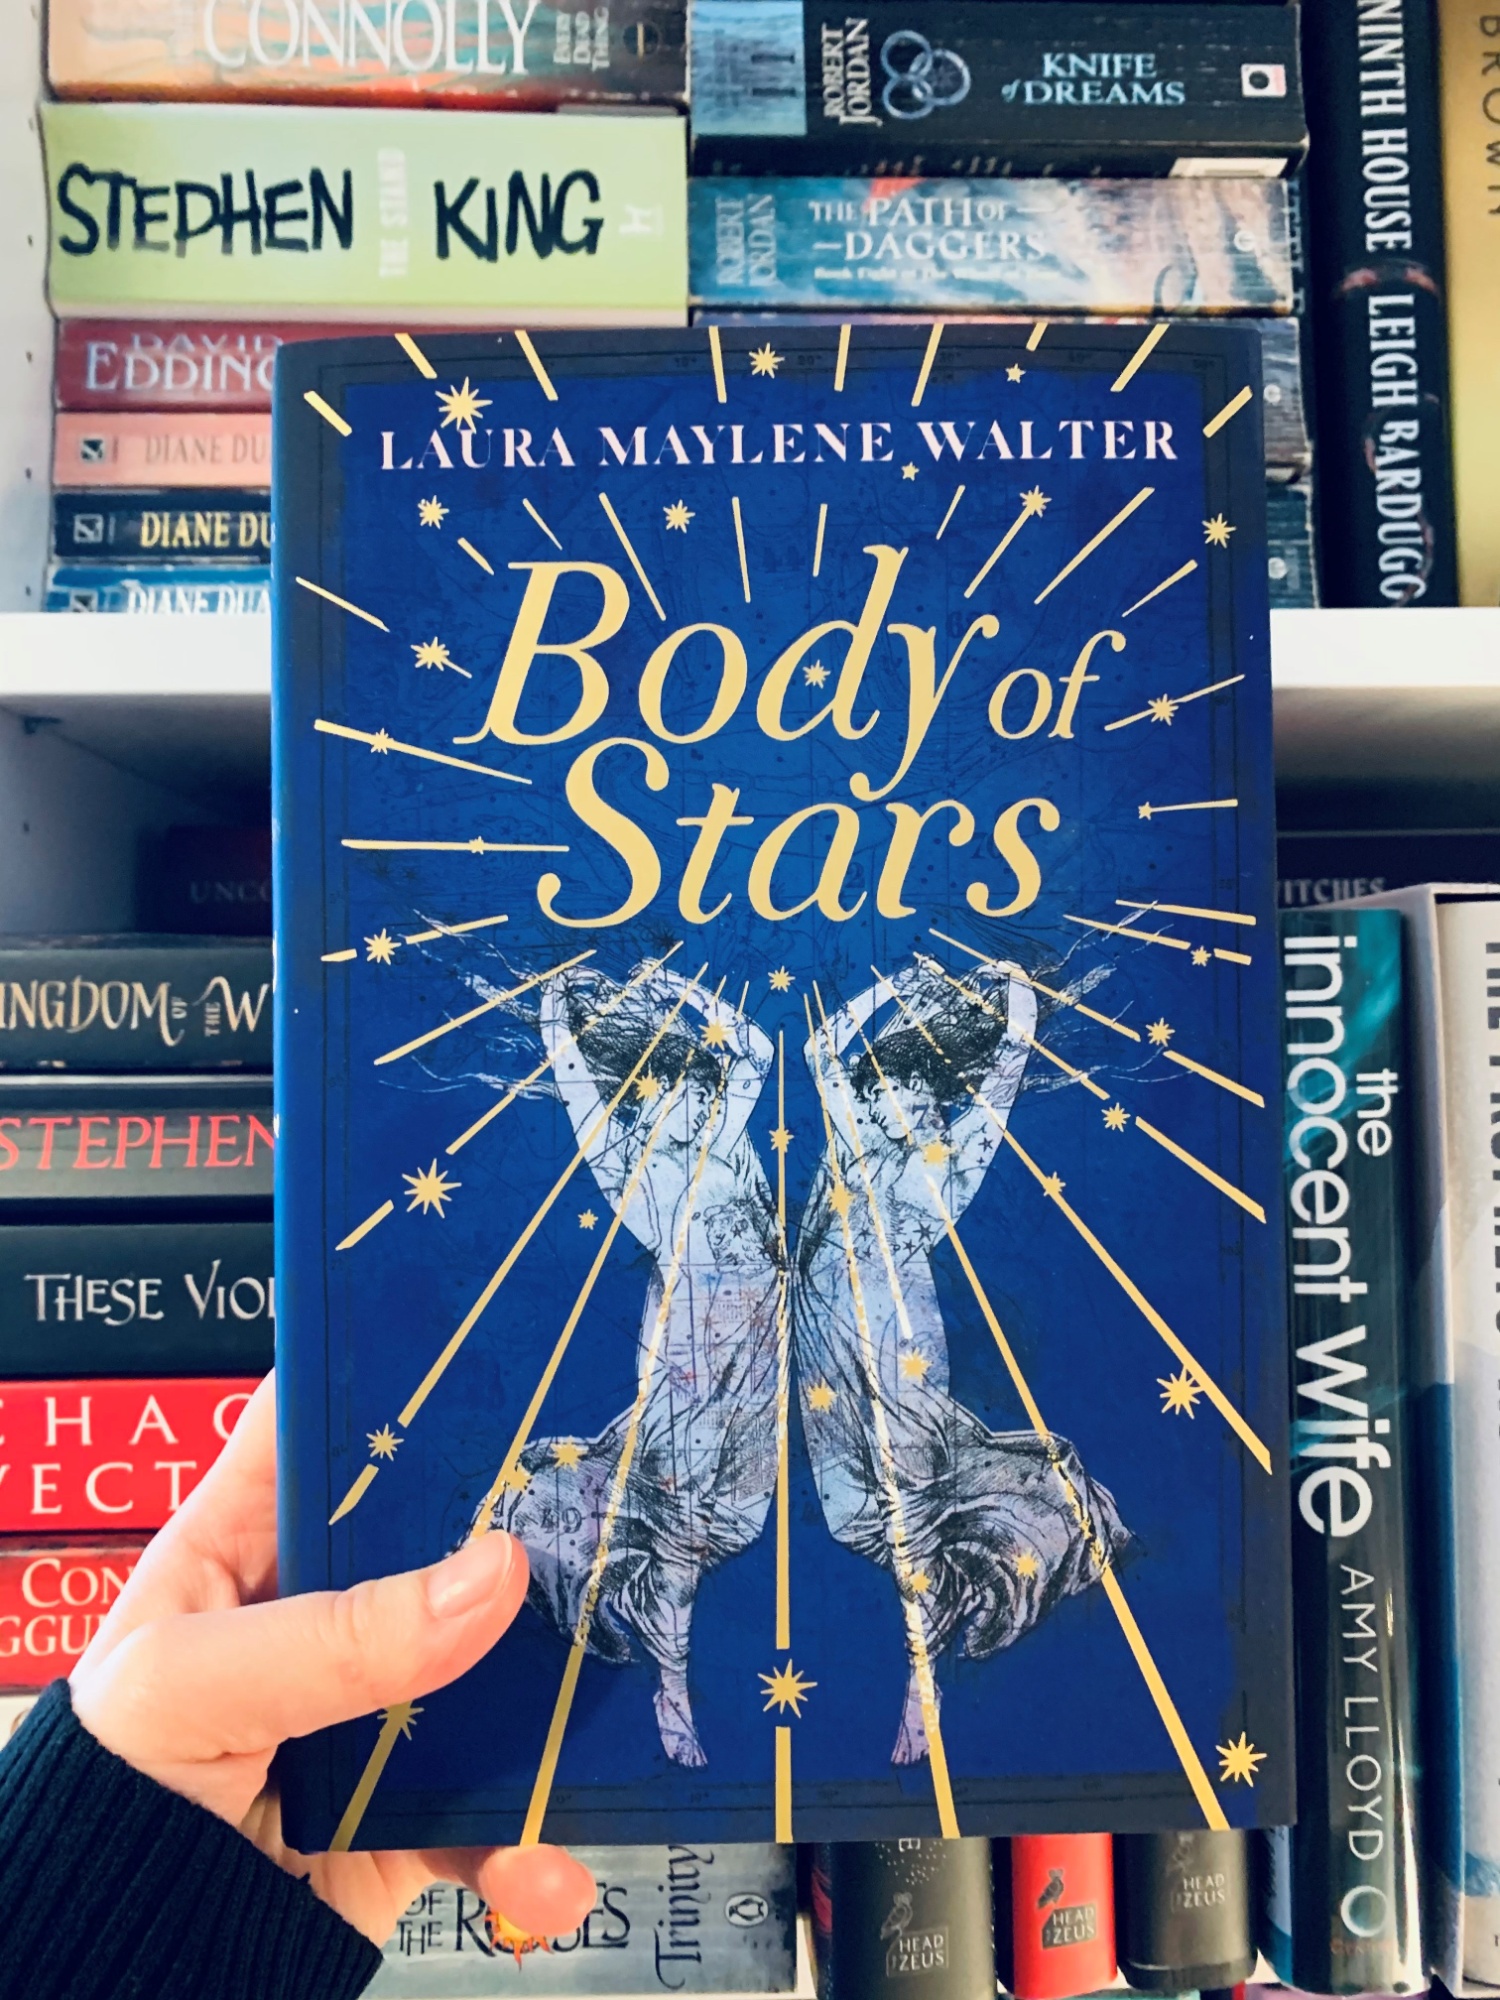 Miss Davis currently reading - Body of Stars